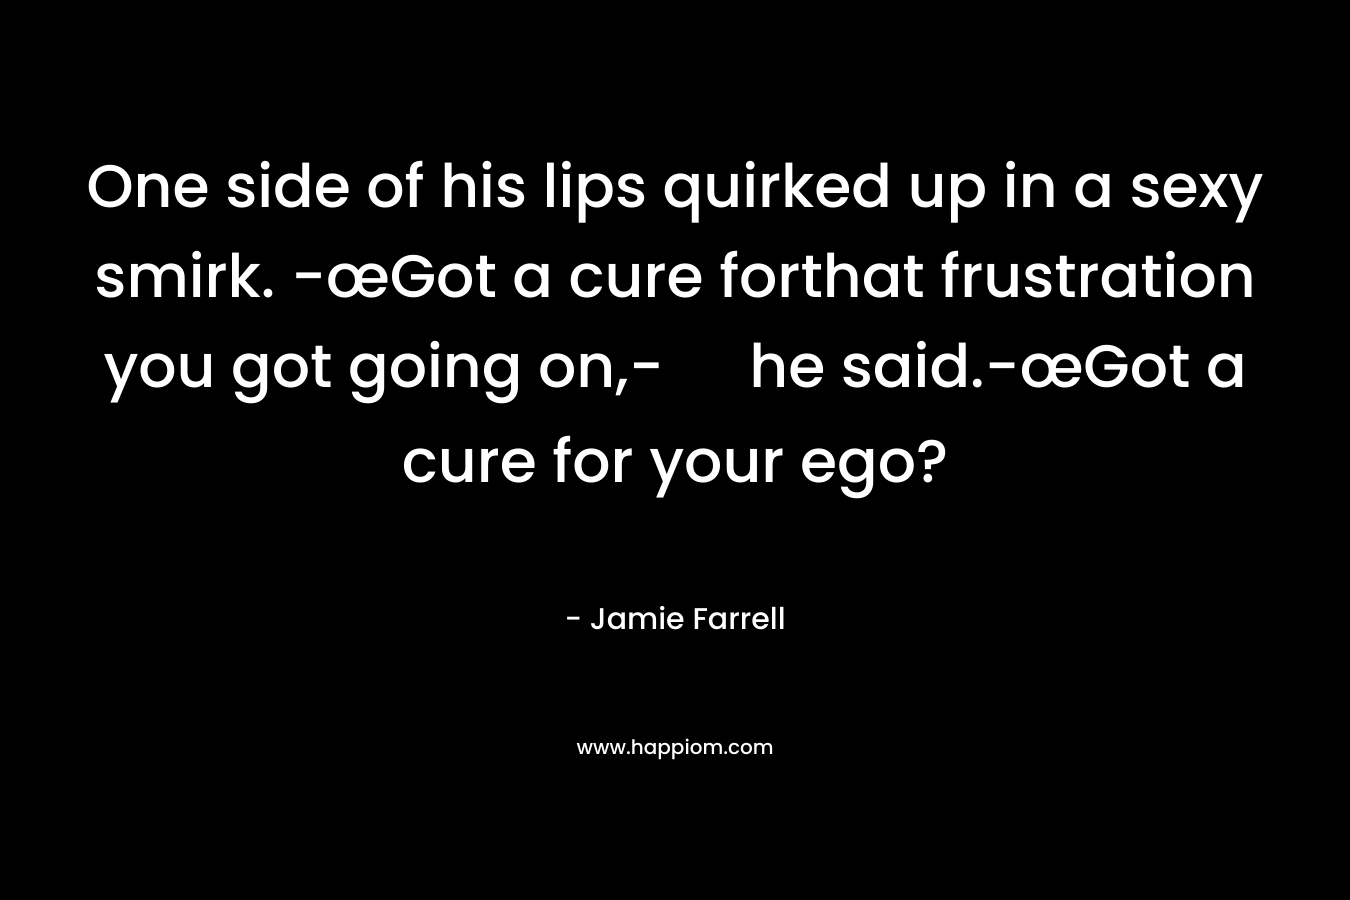 One side of his lips quirked up in a sexy smirk. -œGot a cure forthat frustration you got going on,- he said.-œGot a cure for your ego?